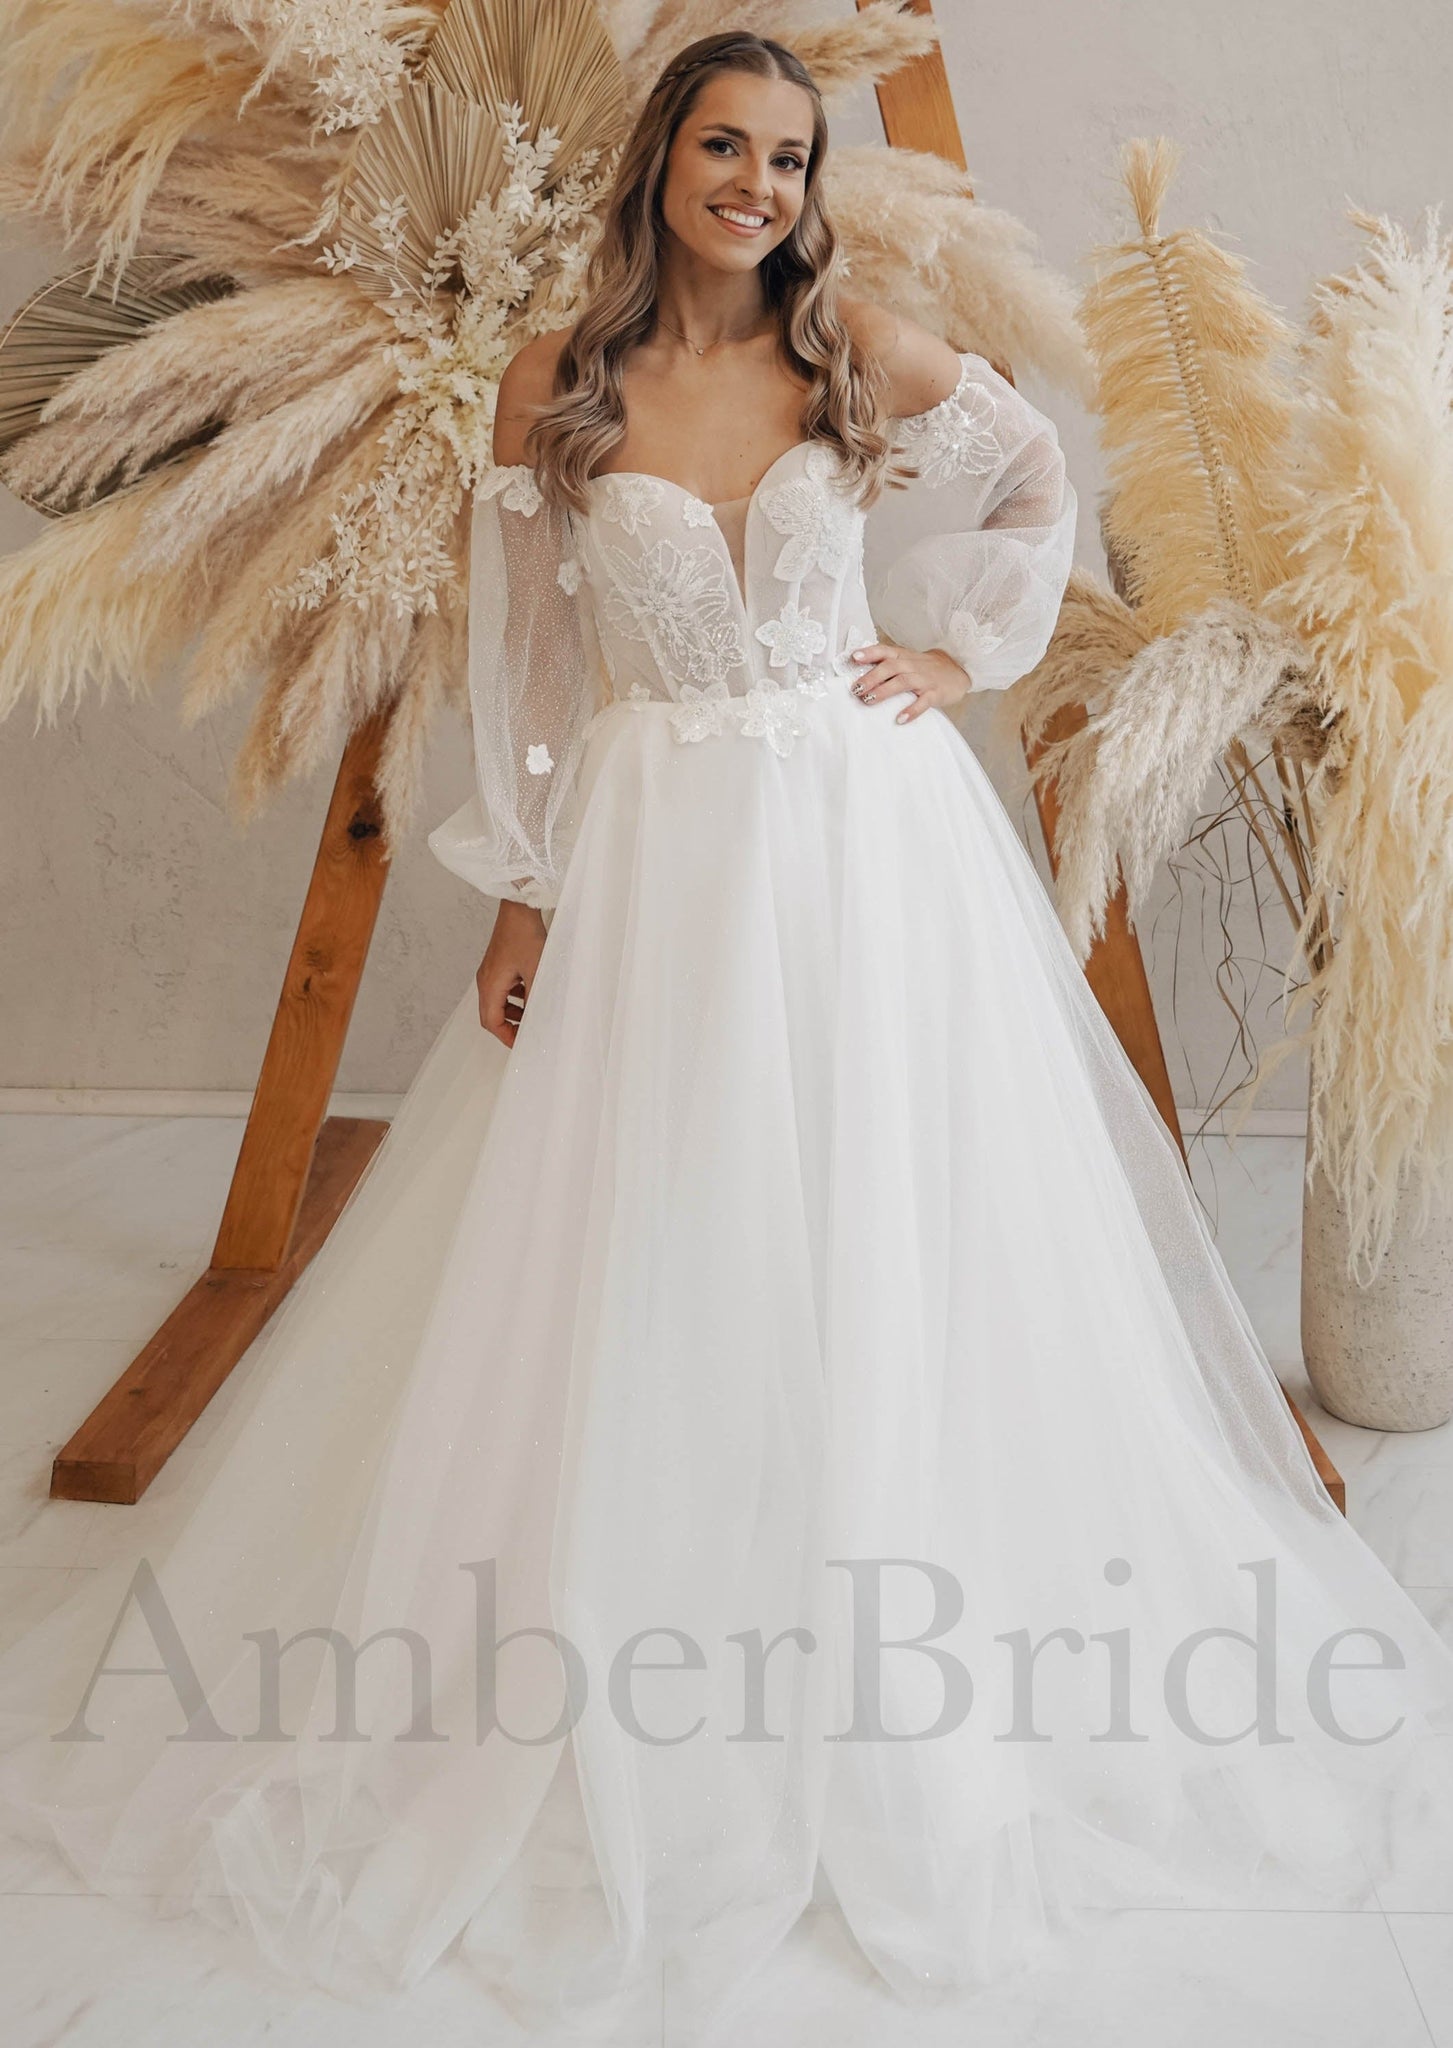 Ethereal Sleeve Lace Applique Tulle A-line Wedding Dress - Promfy